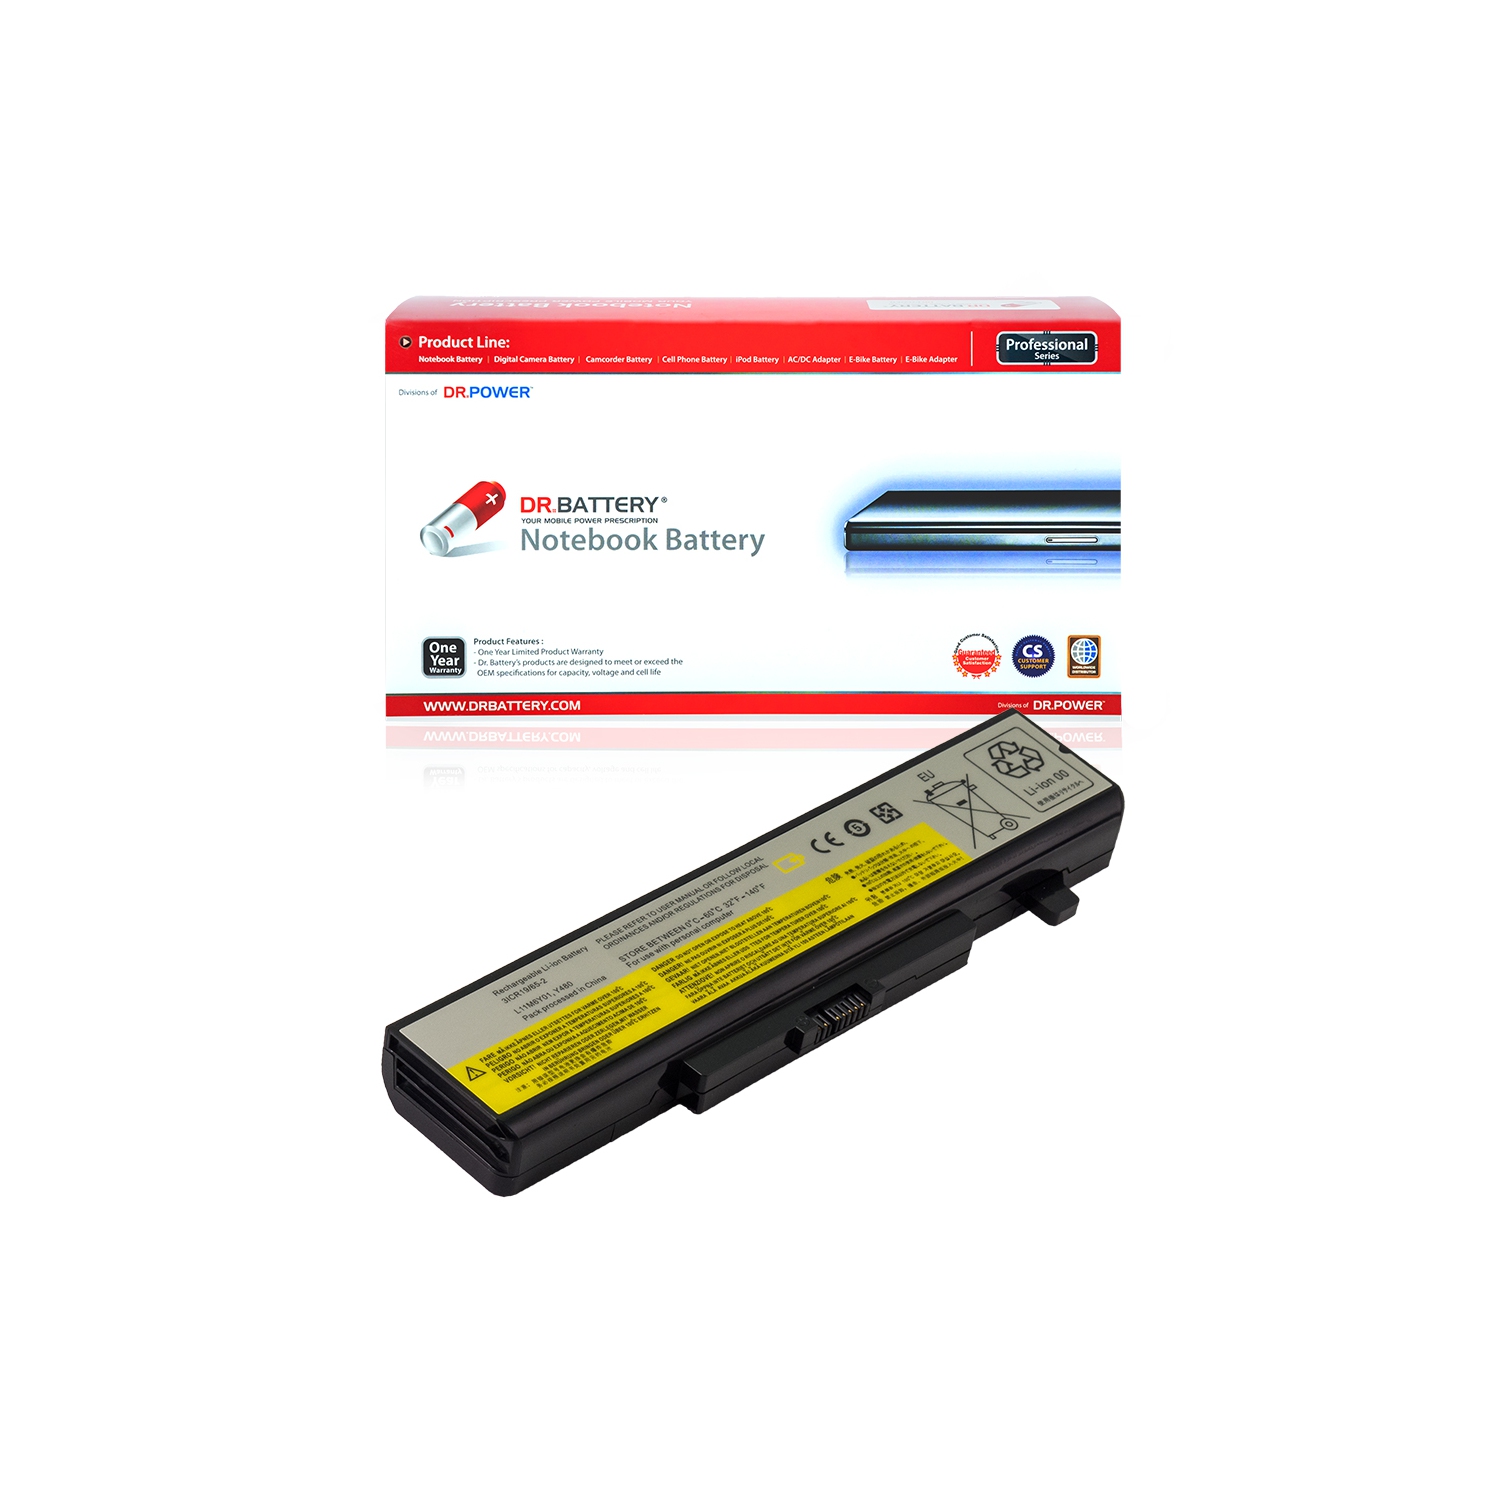 DR. BATTERY - Replacement for Lenovo Essential G485 / G580 / G585 / B580 / B590 / 0A36311 / 0B58693 / 121500047 / 121500048